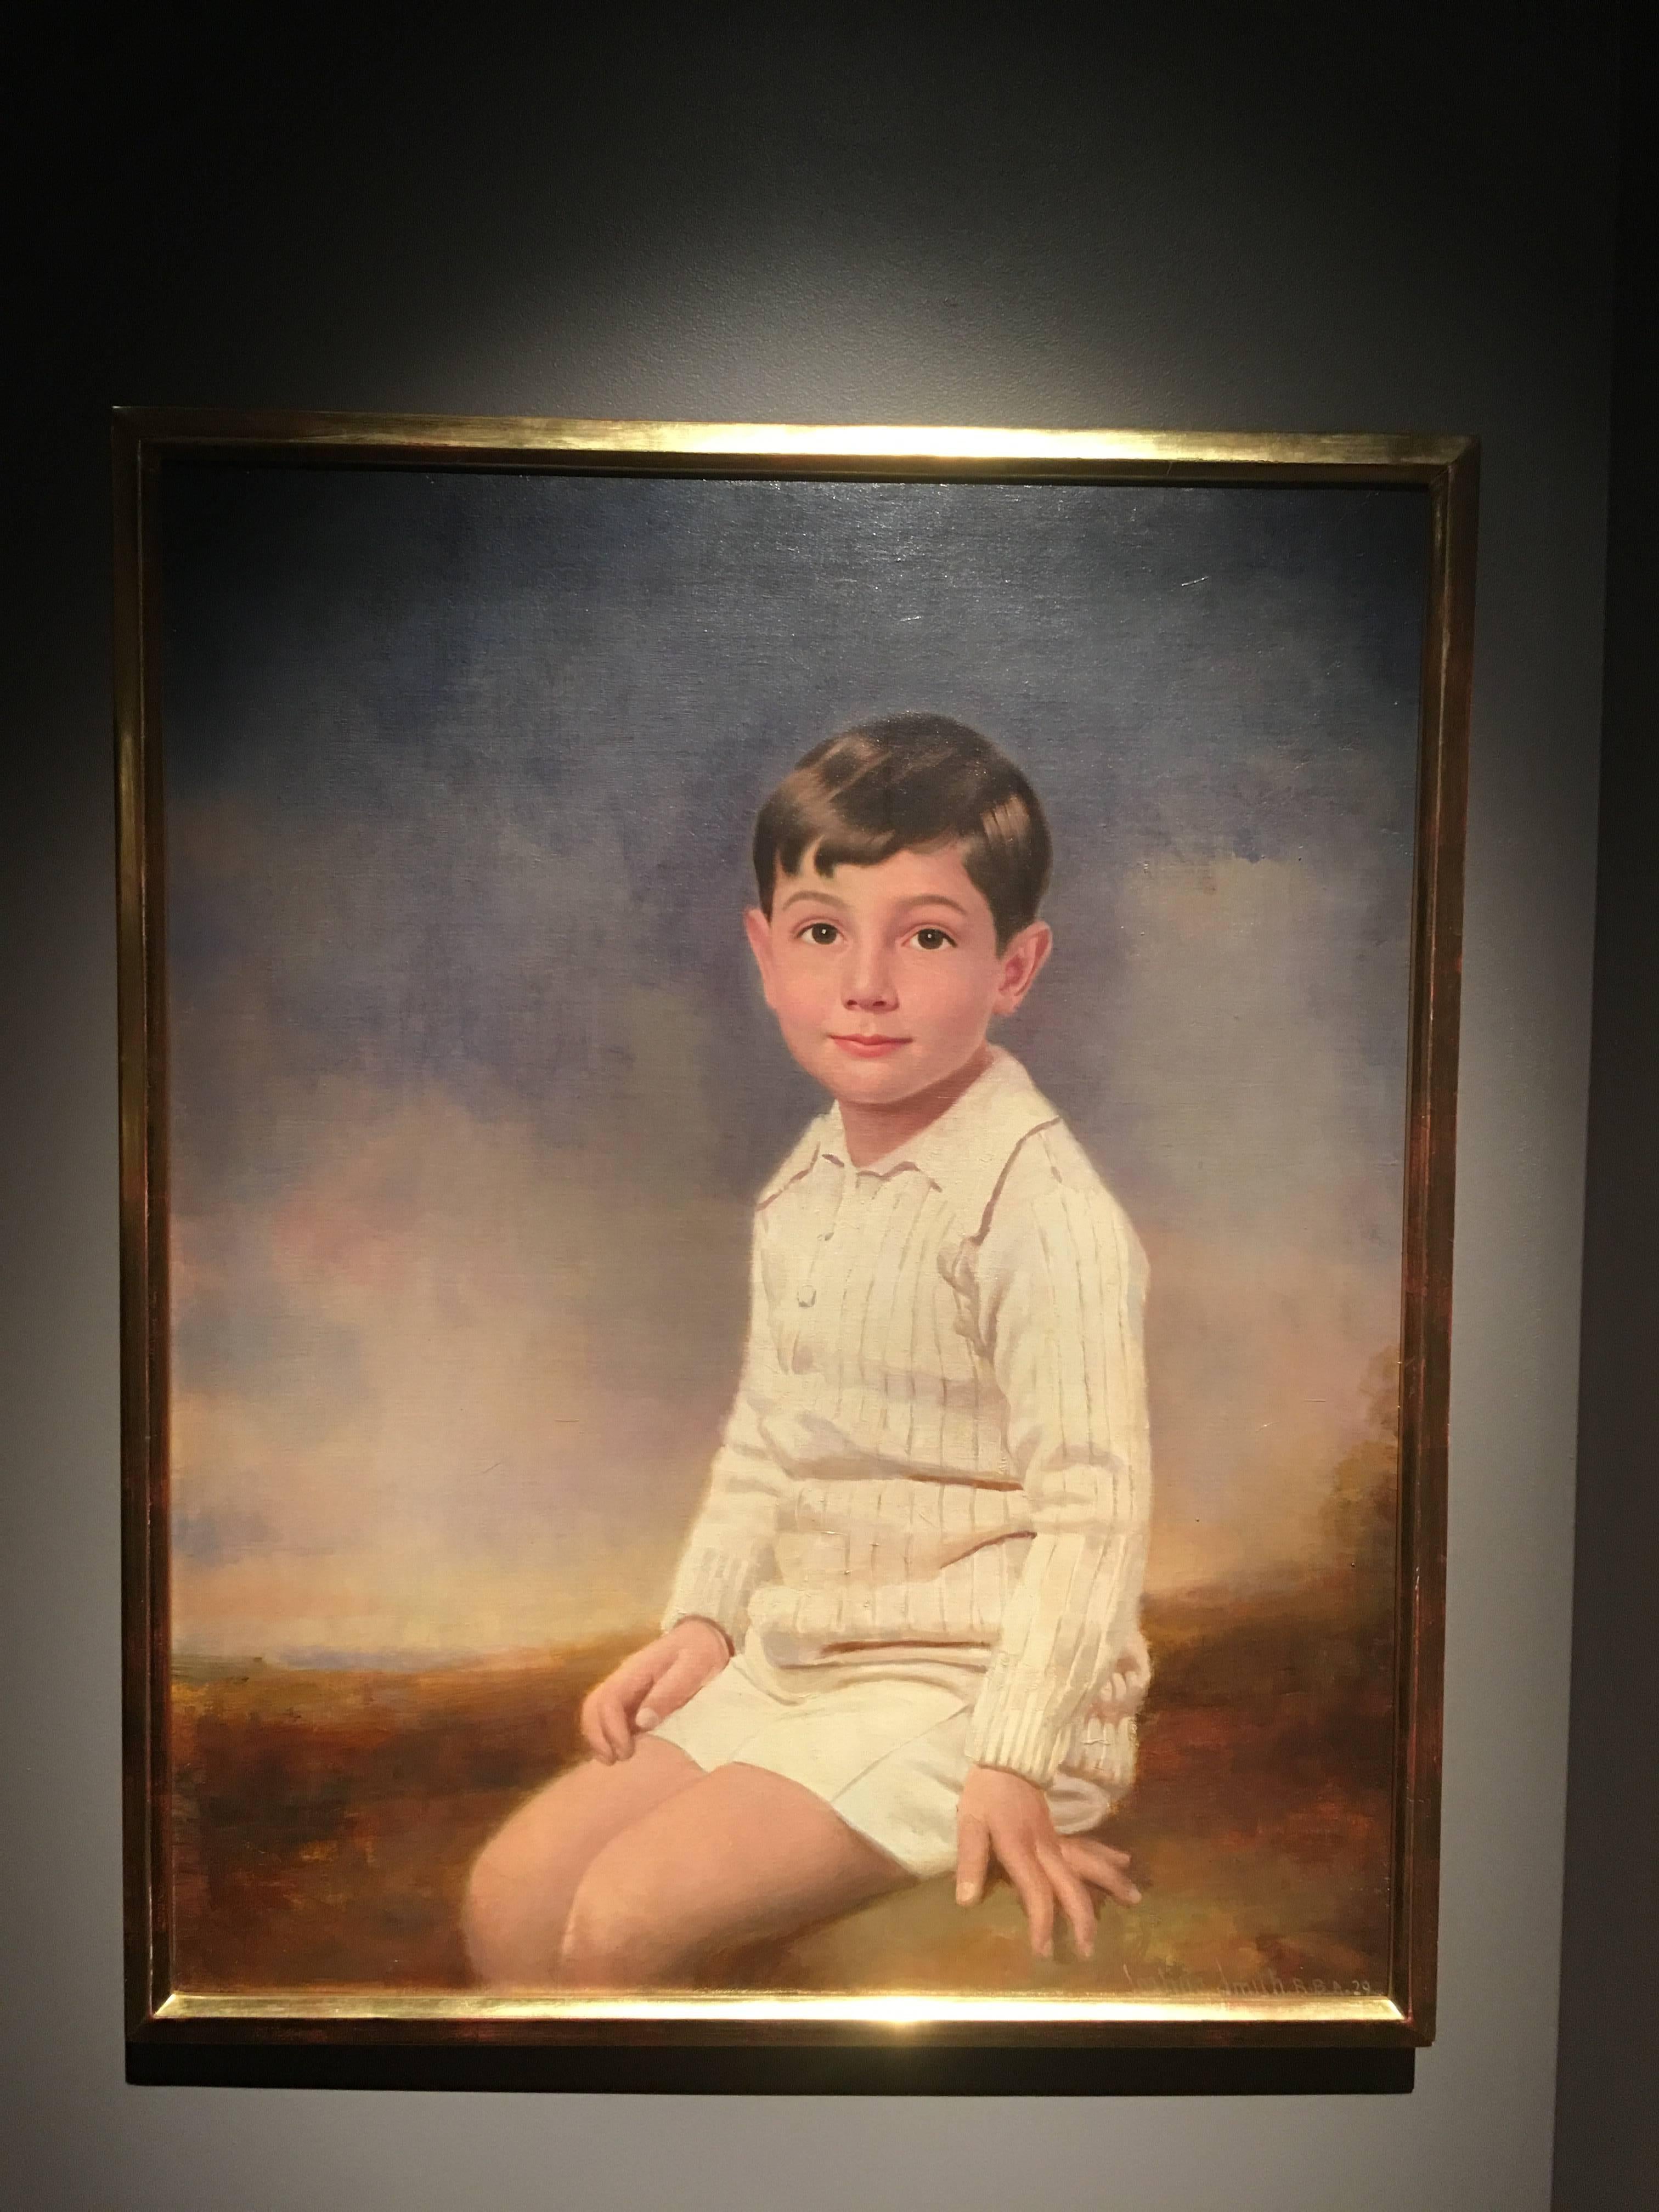 Utterly charming three-quarter portrait of a young boy in play clothes from the early 20th century. Signed and dated Joshua Smith R.B.A. '29 in lower right. Striking facial features and a priceless expression make this portrait a unique and